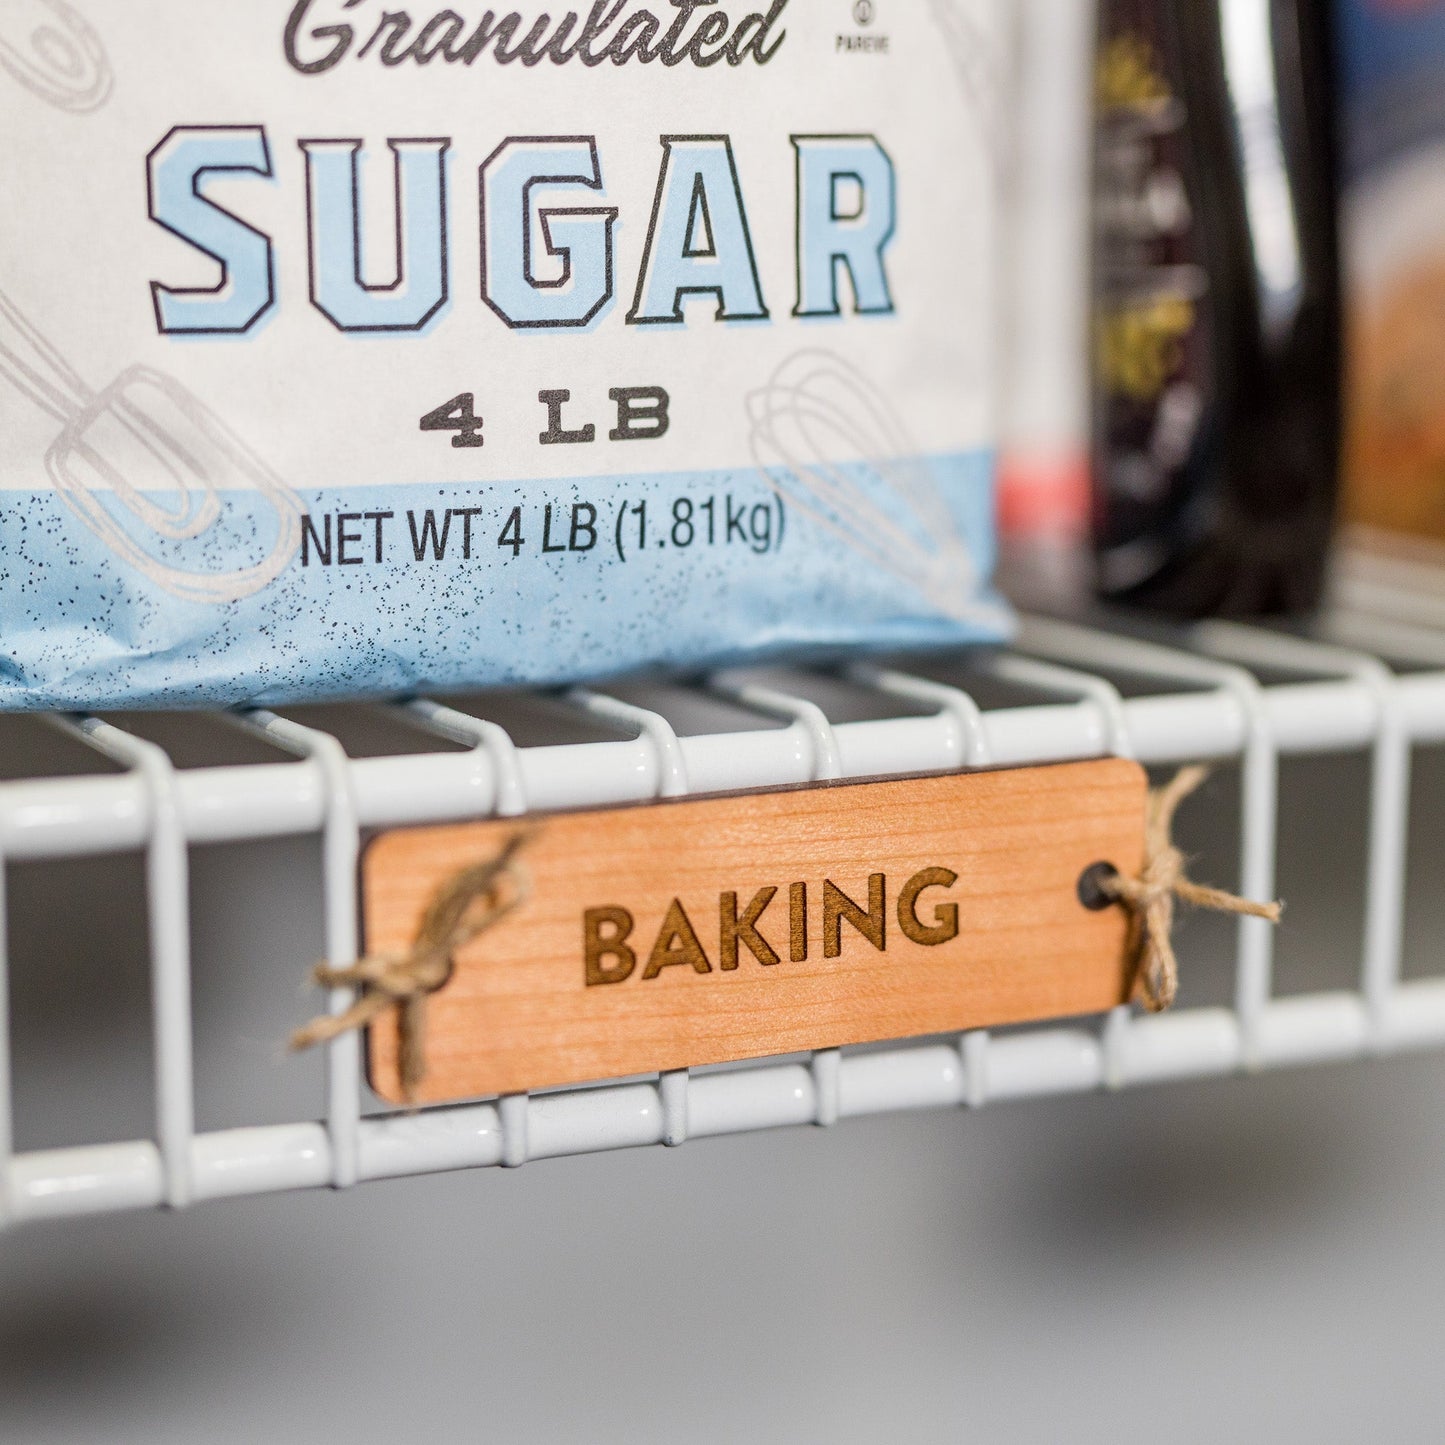 Tie-On Labels for Closet Organization - Cherry Wood Baking clean font on ventilated wire shelving - by LeeMo Designs in Bend, Oregon